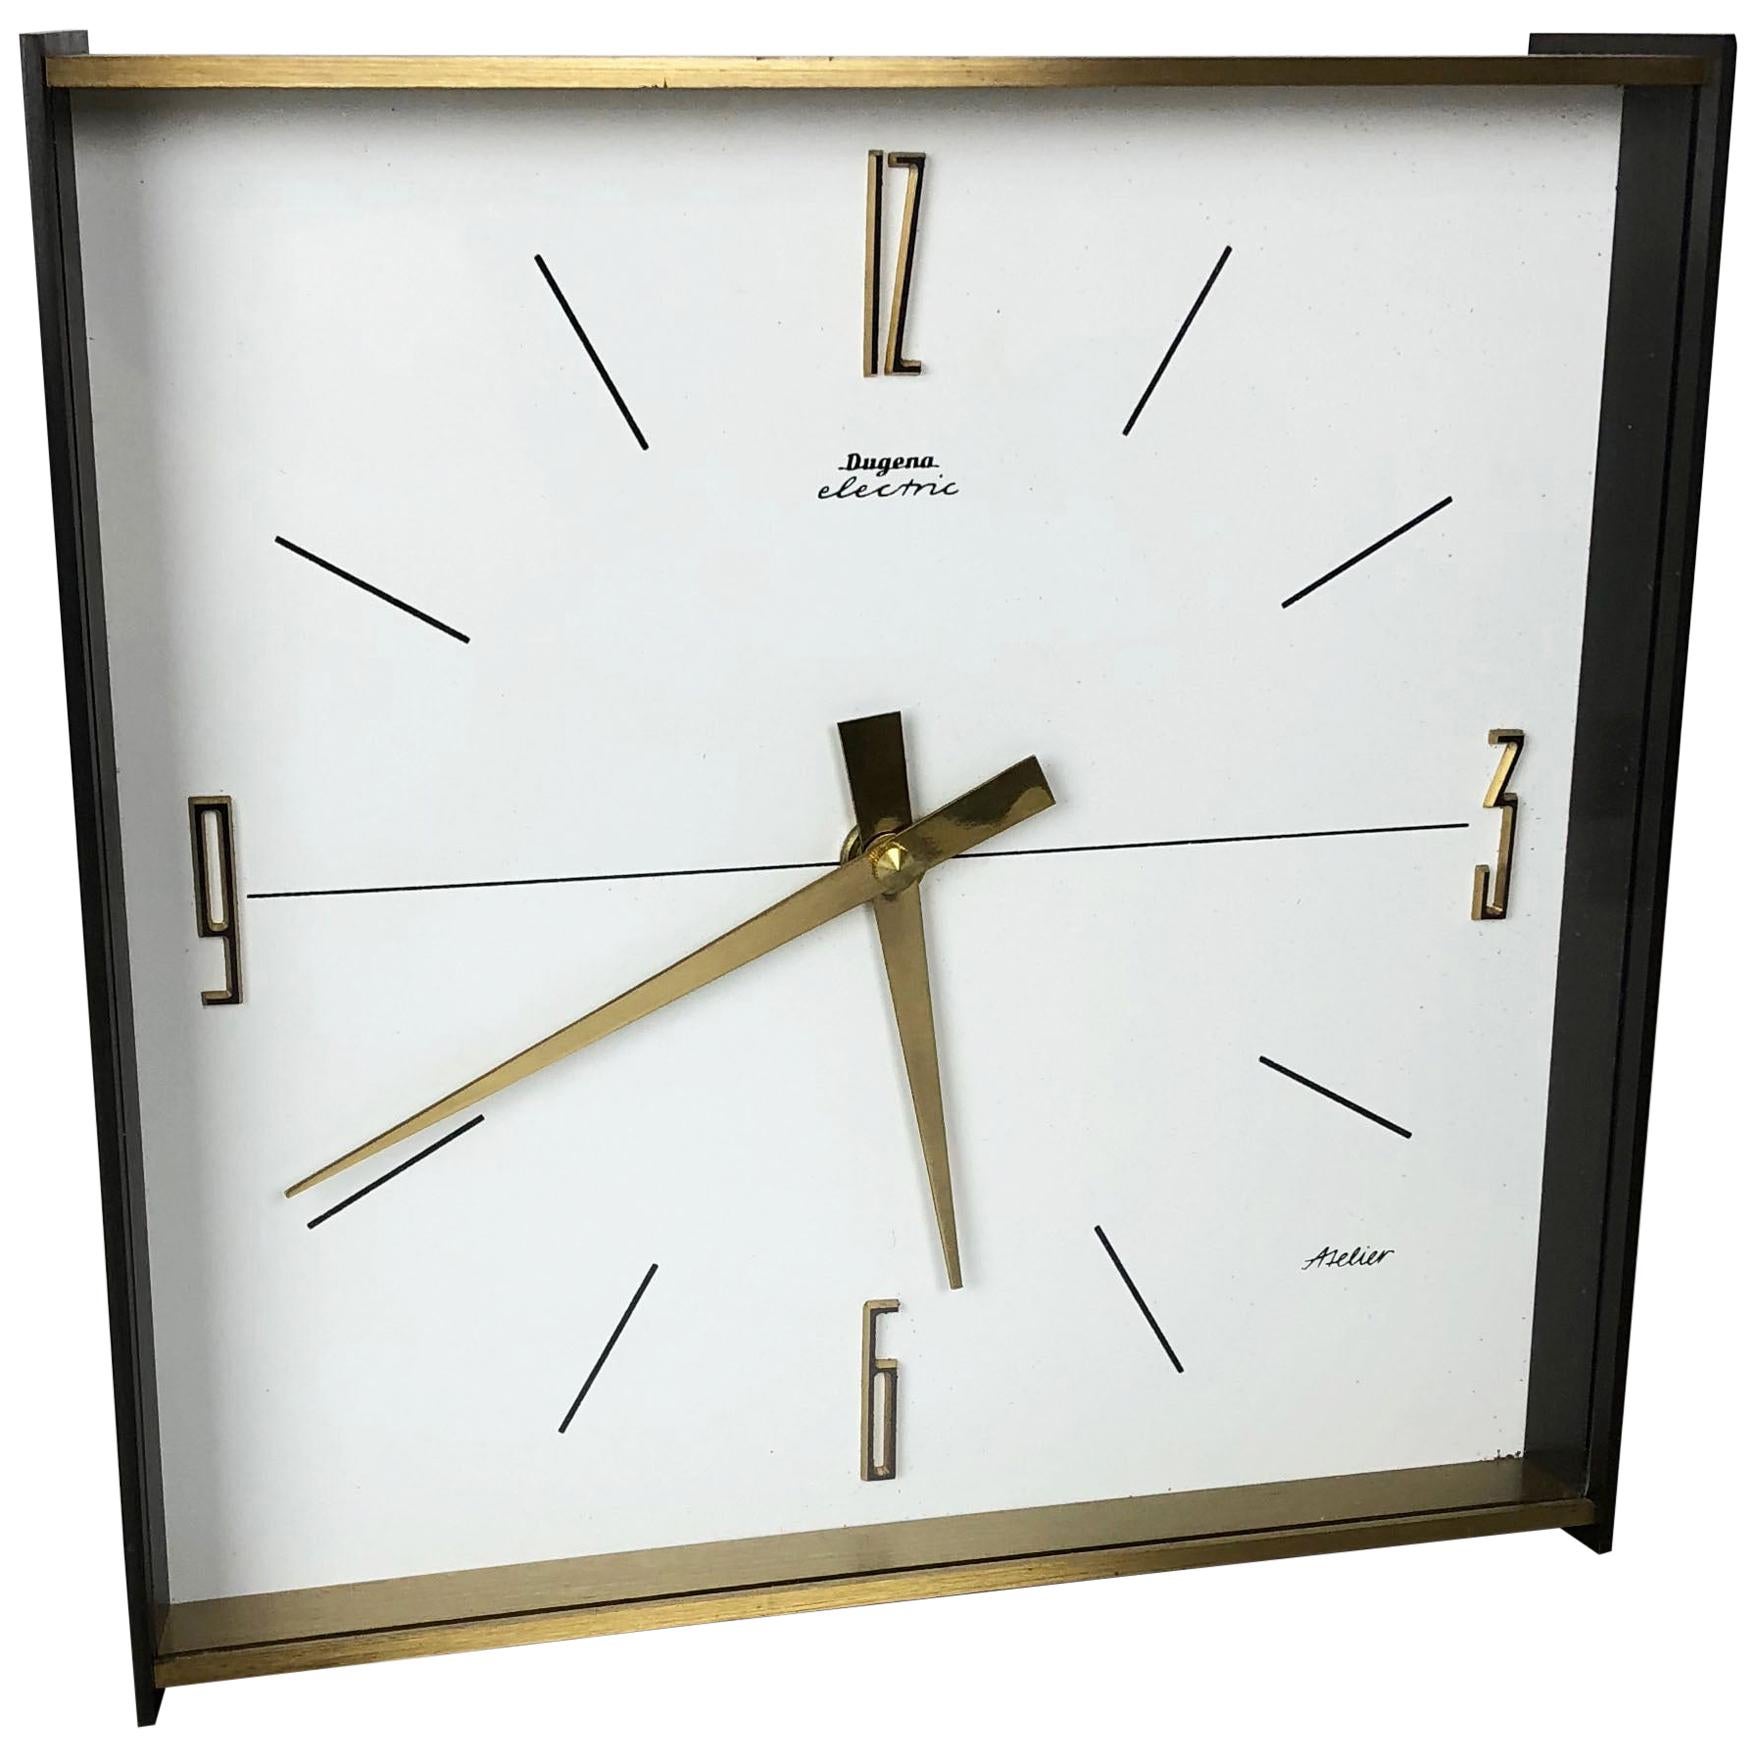 Vintage 1960s Hollywood Regency Brass Wall Table Clock Dugena Electric, Germany